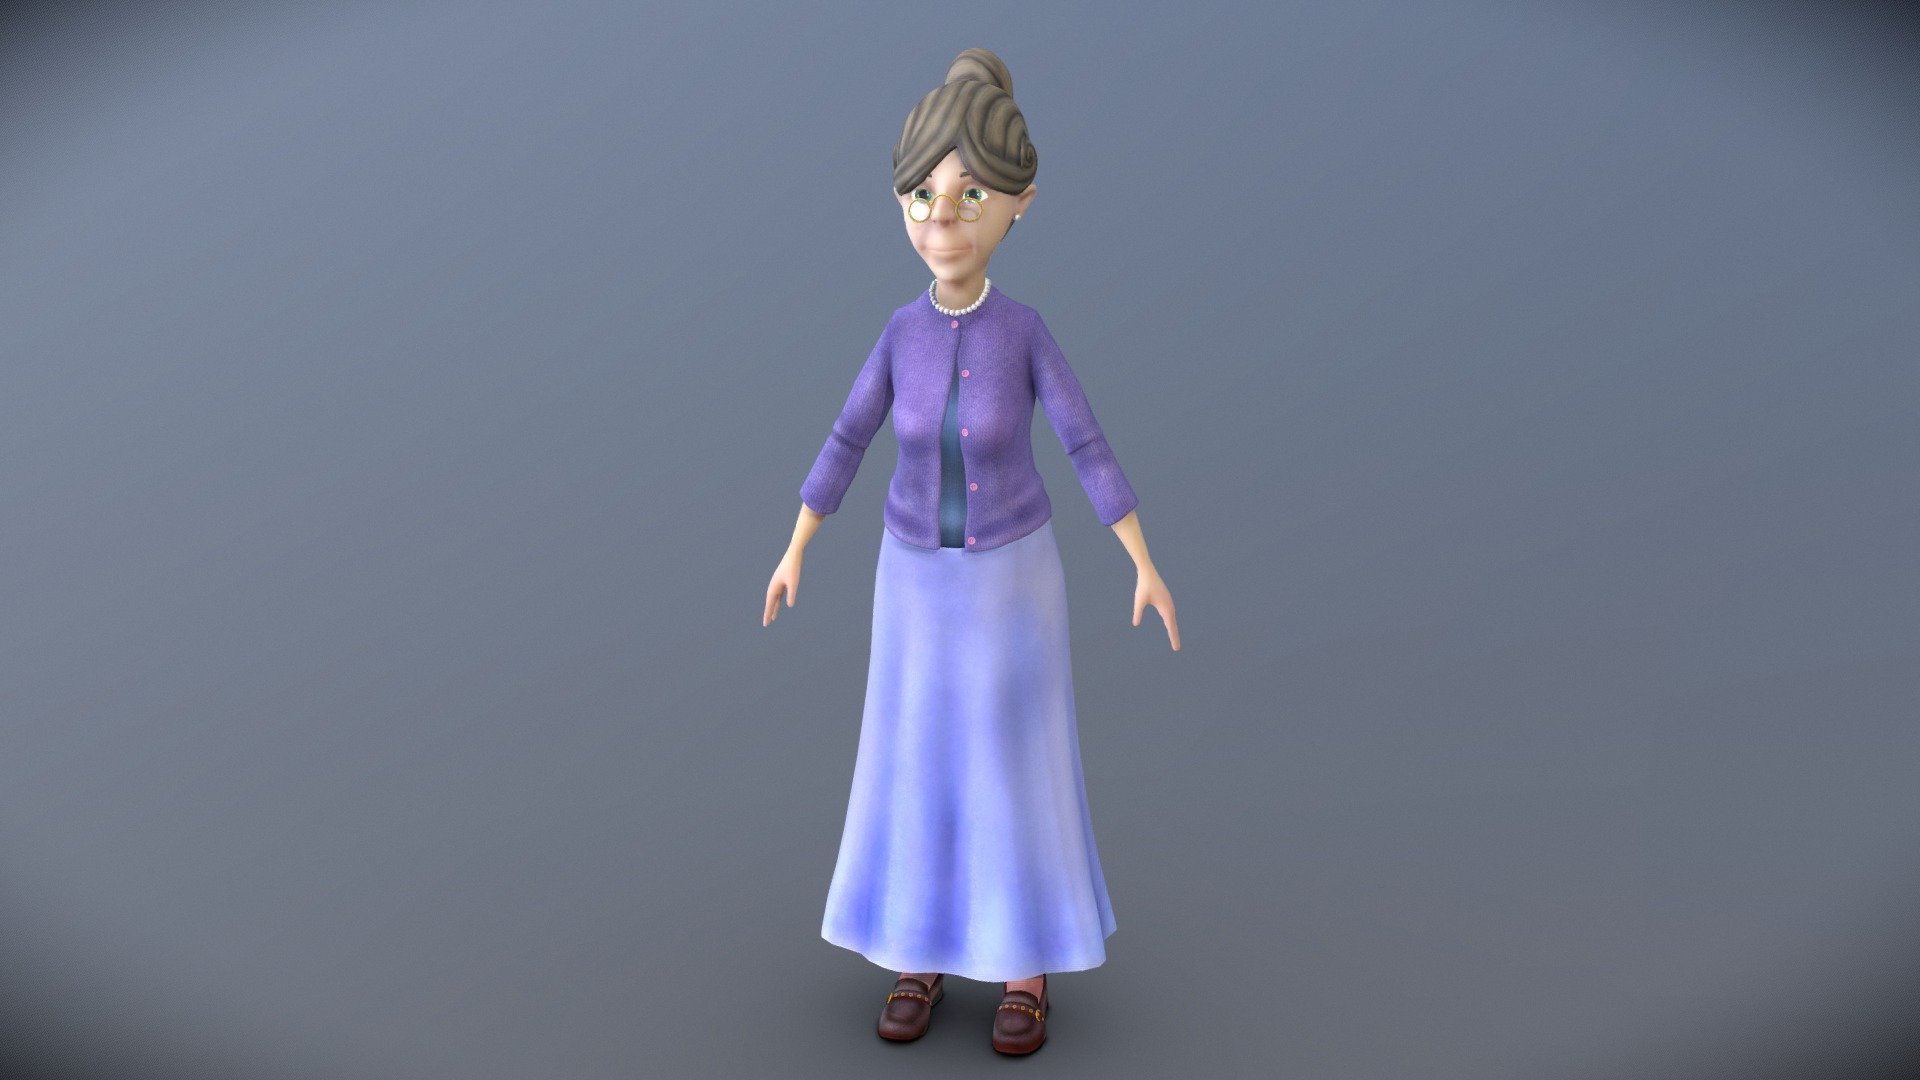 A cartoon grandma character model with textures.

Color, Normal, and Specular Maps.

Collada and FBX format included 3d model